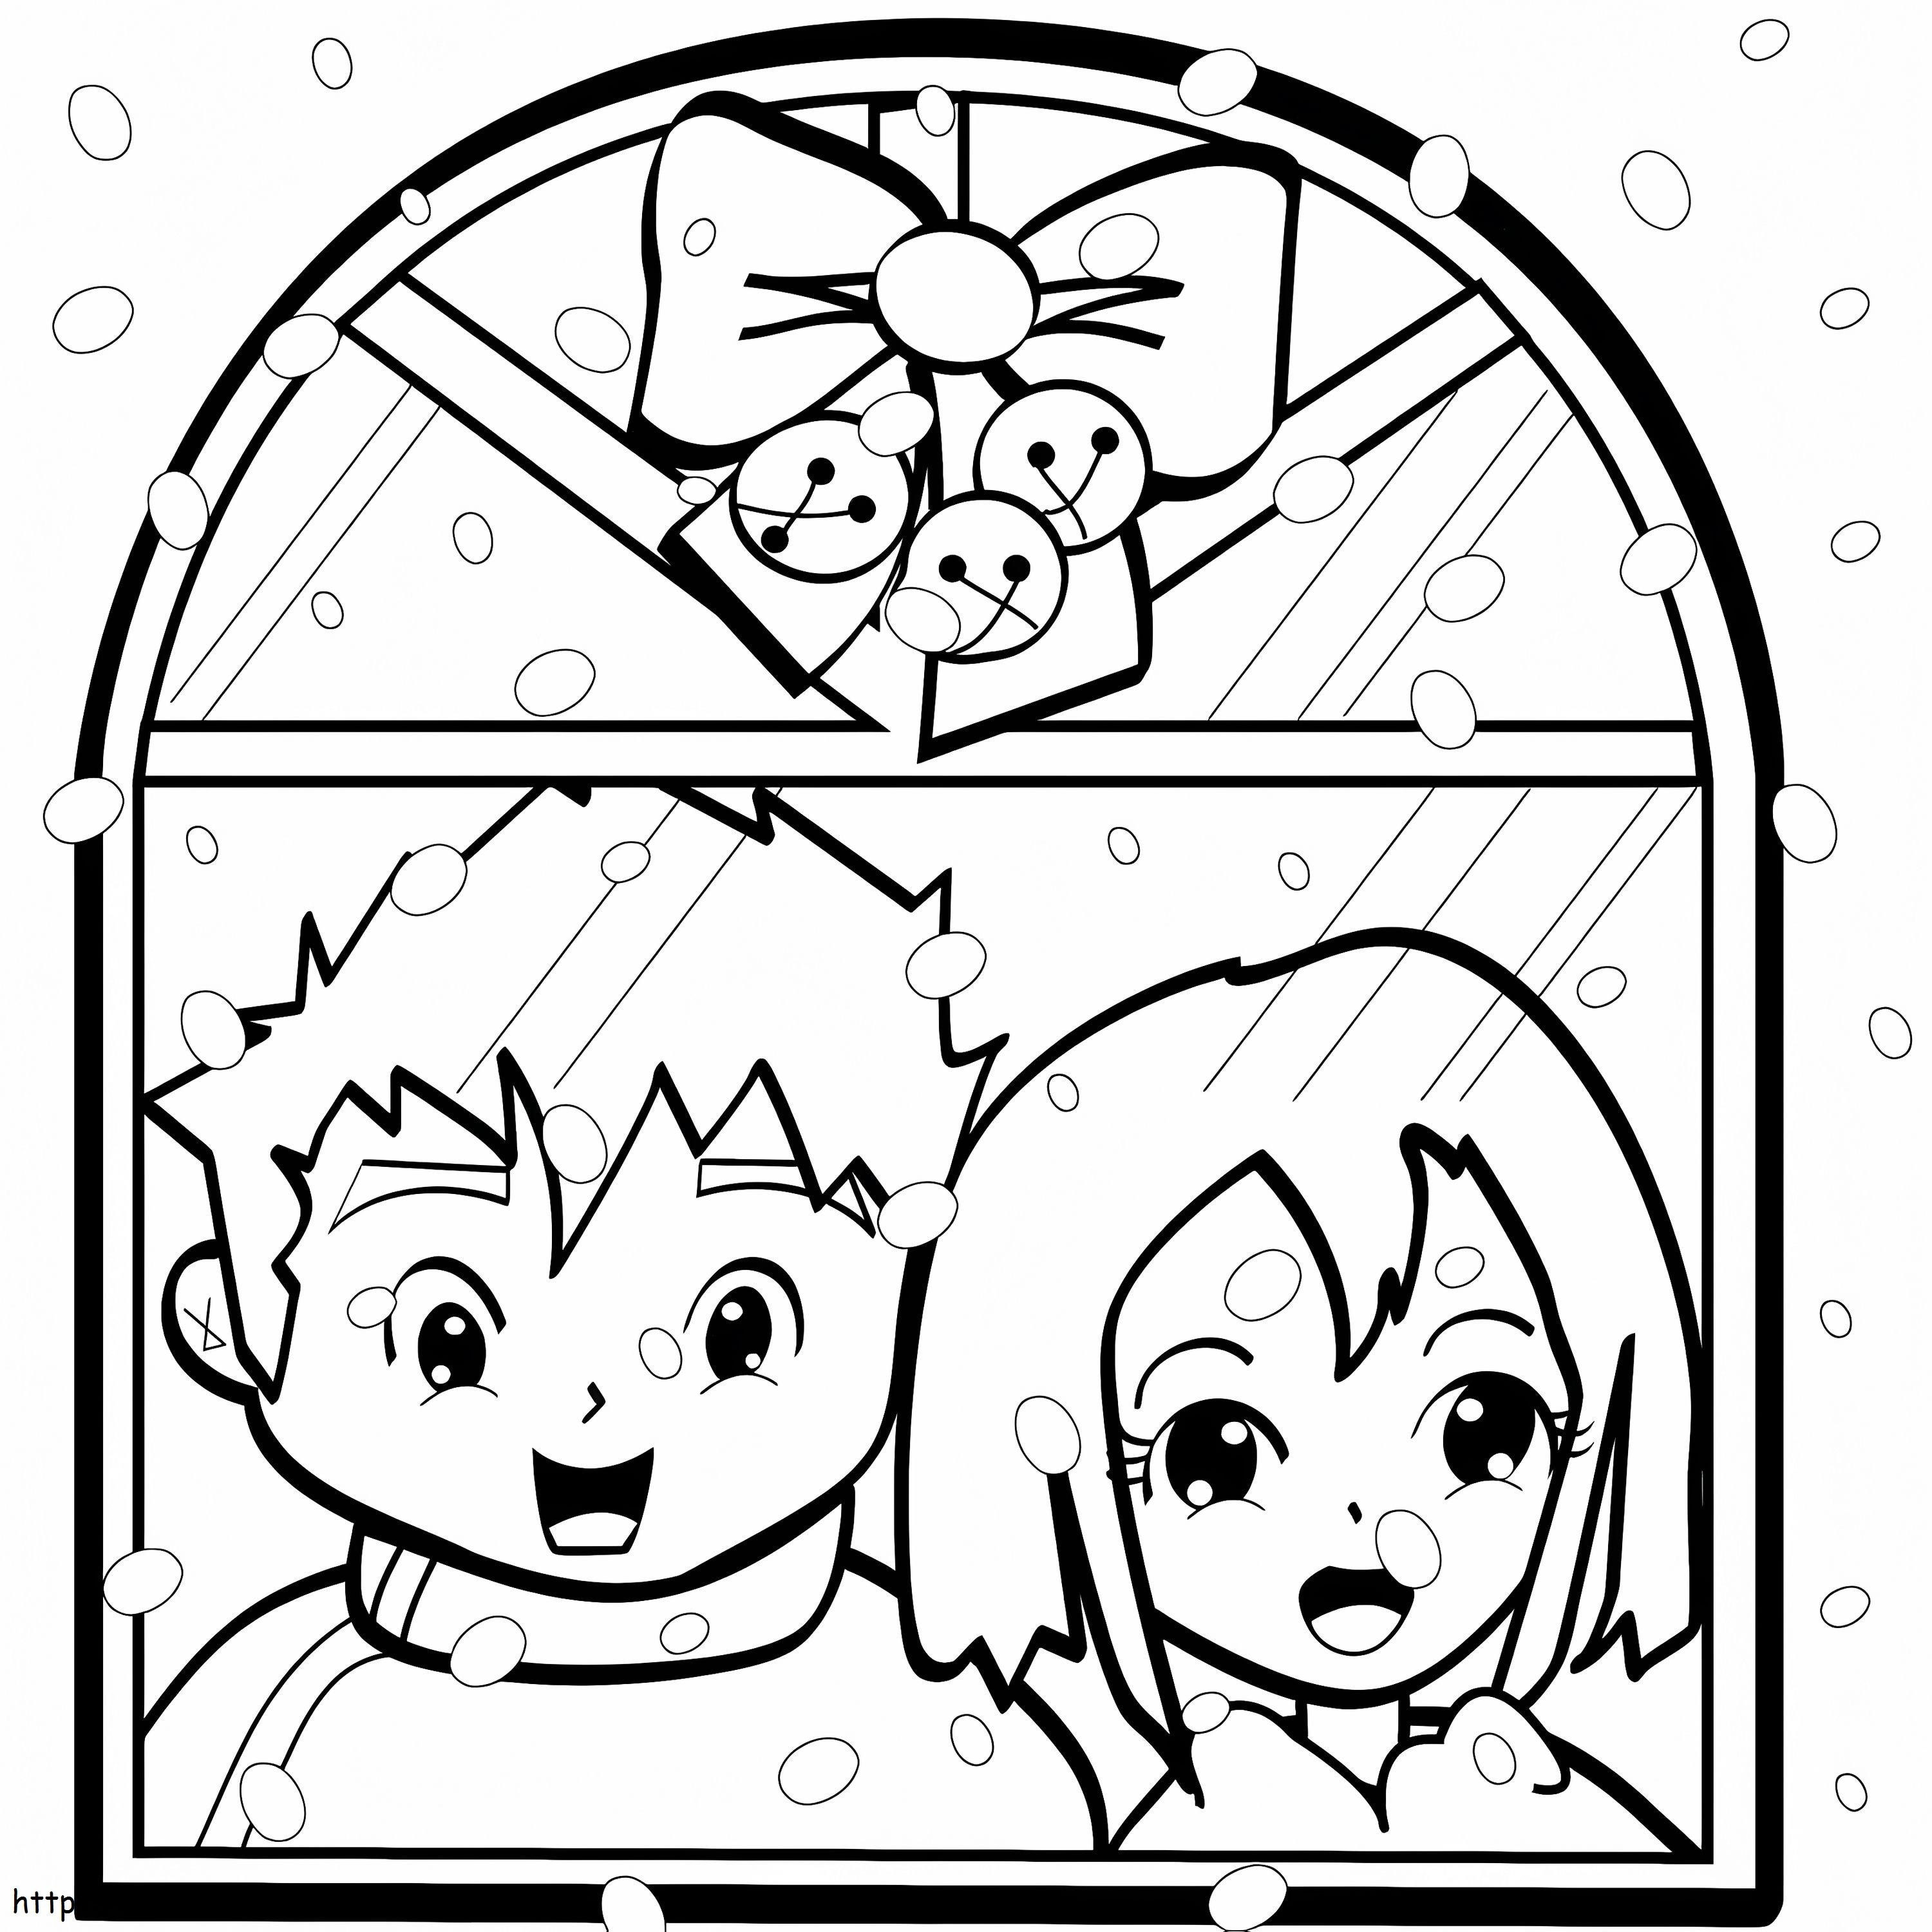 Kids Looking Out Window coloring page